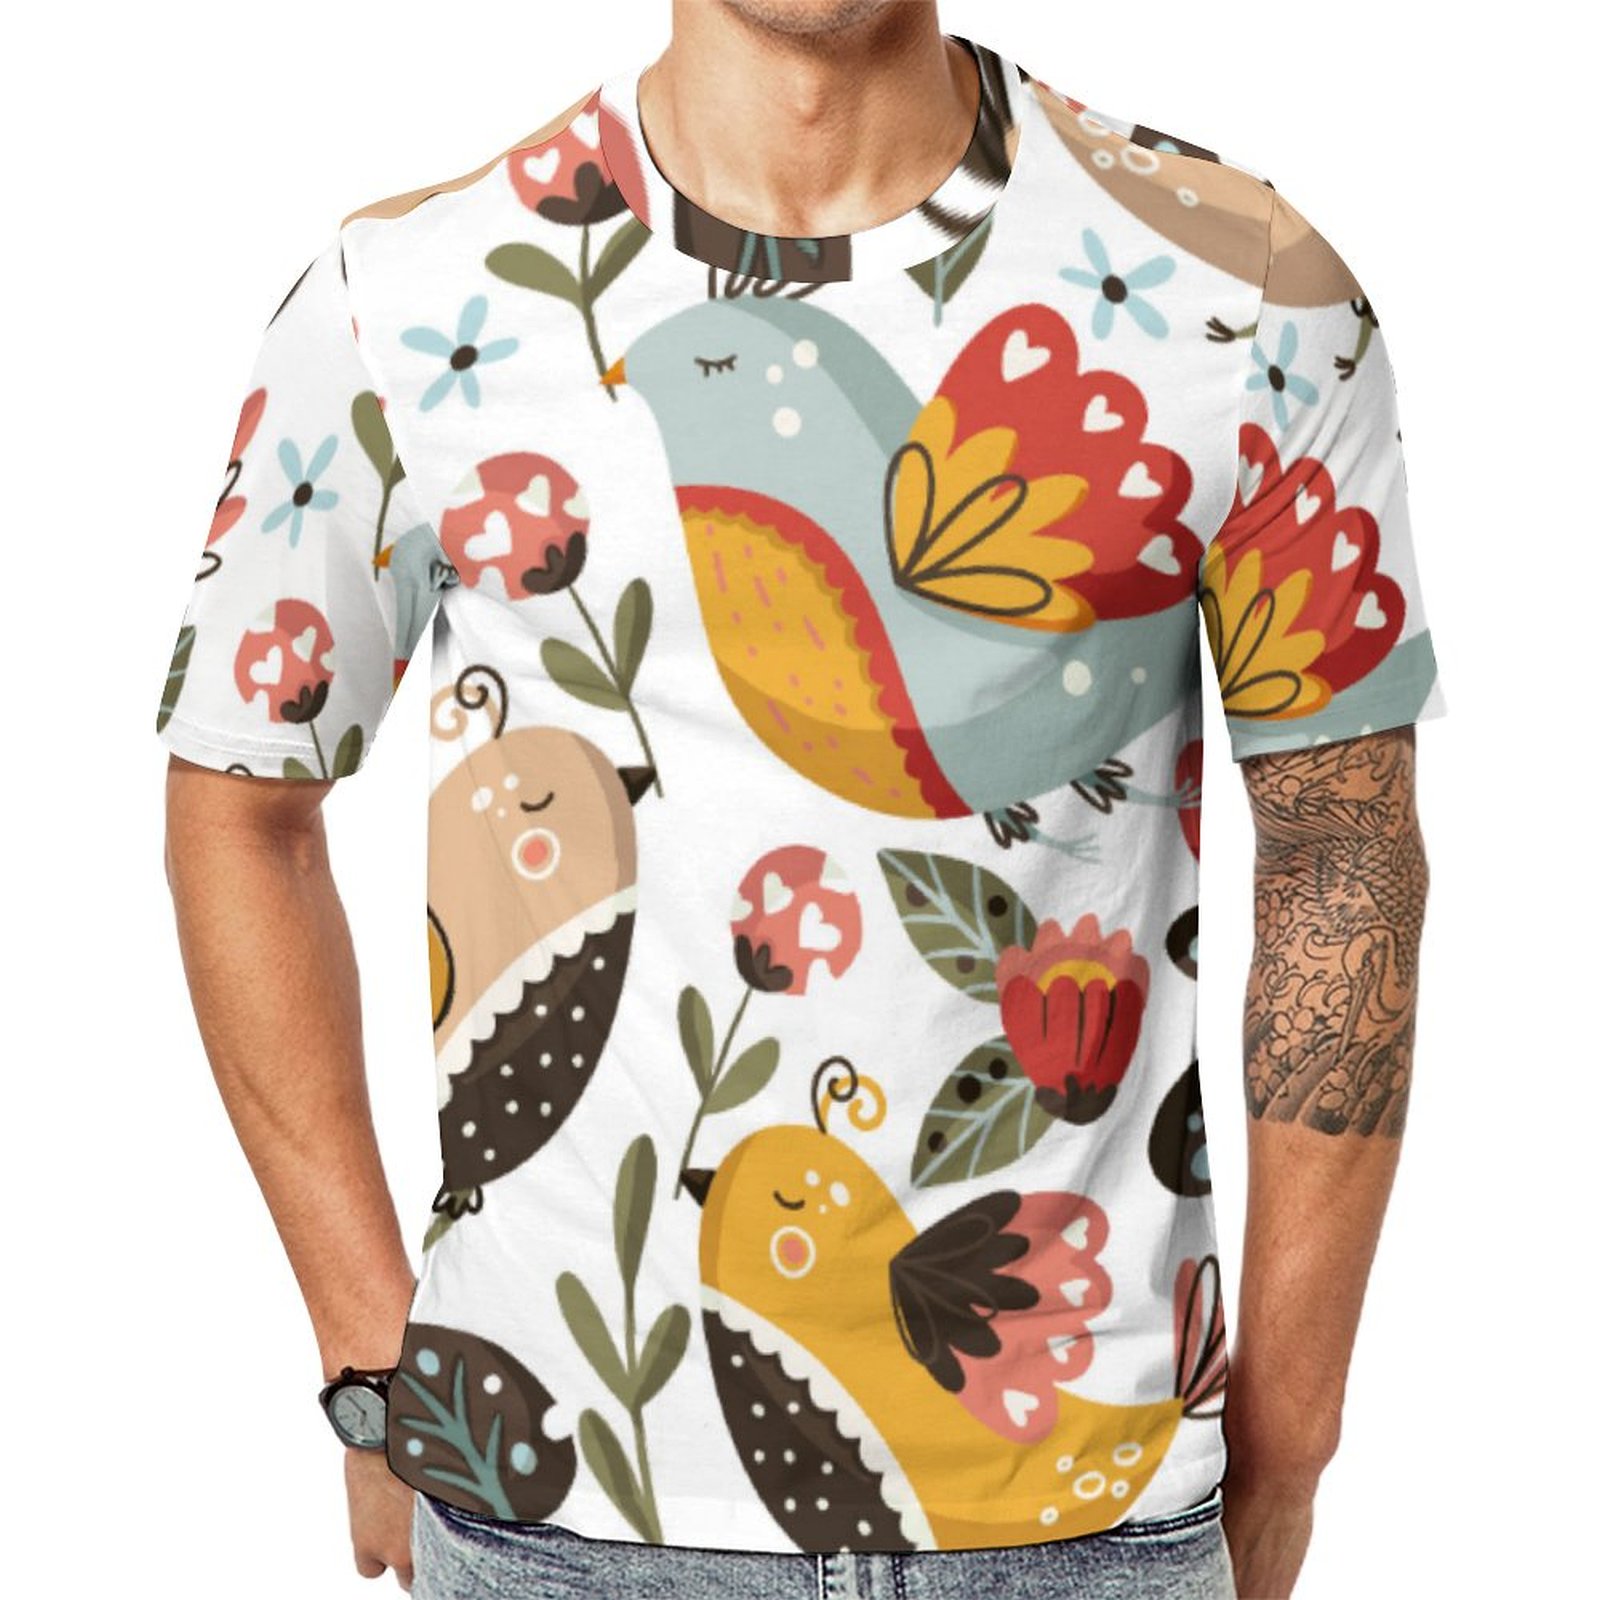 Pattern Of Colorful Birds With Flowers In Nibs Short Sleeve Print Unisex Tshirt Summer Casual Tees for Men and Women Coolcoshirts